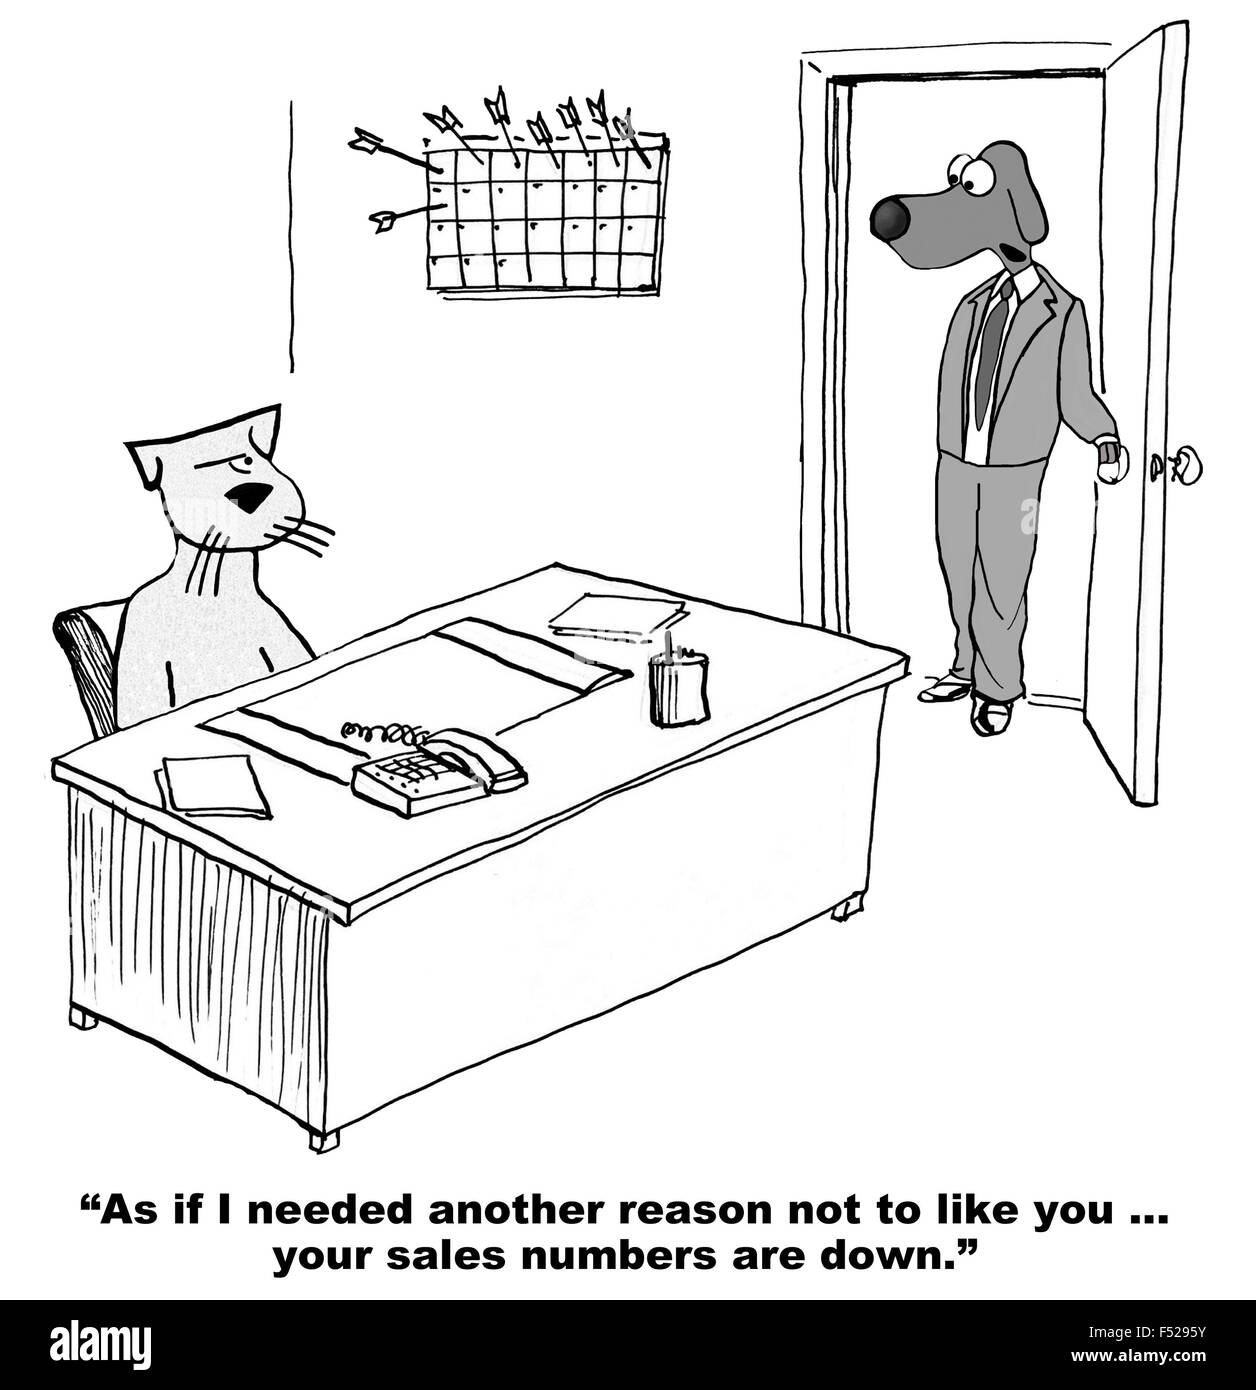 Business cartoon of boss dog saying to salesman cat, '... another reason not to like you... your sales numbers are down'. Stock Photo